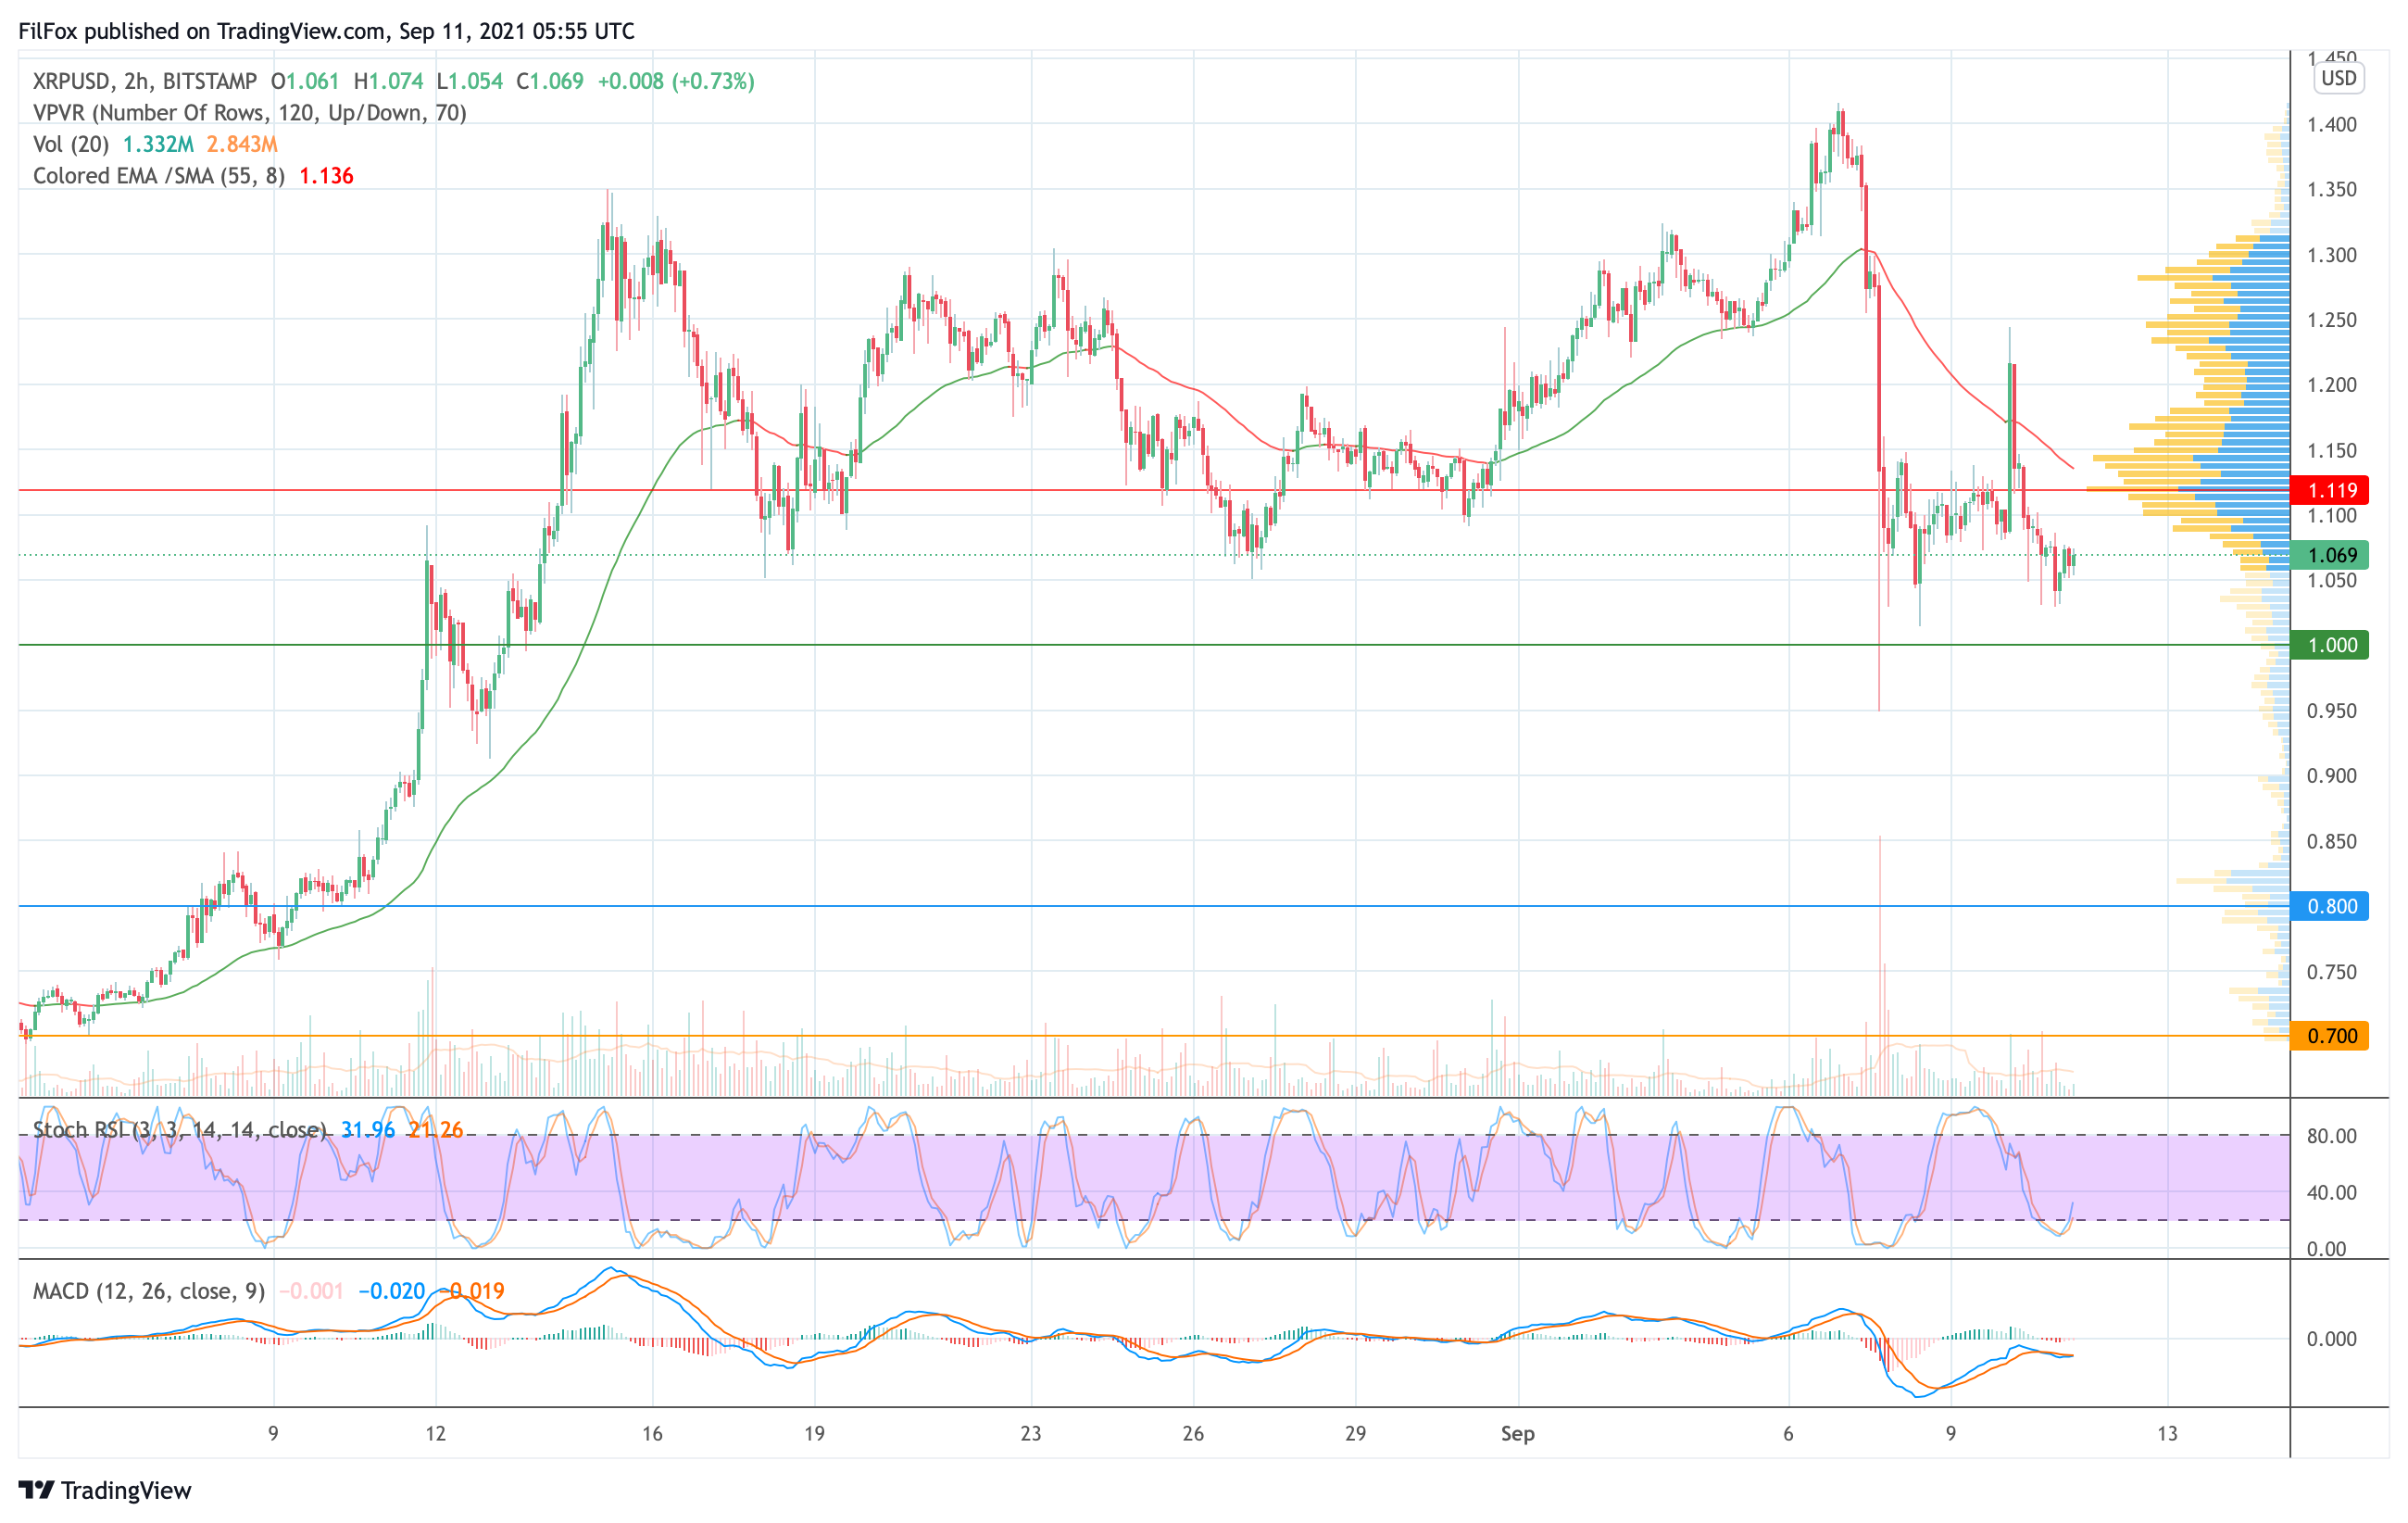 Analysis of the prices of Bitcoin, Ethereum, XRP for 09/11/2021